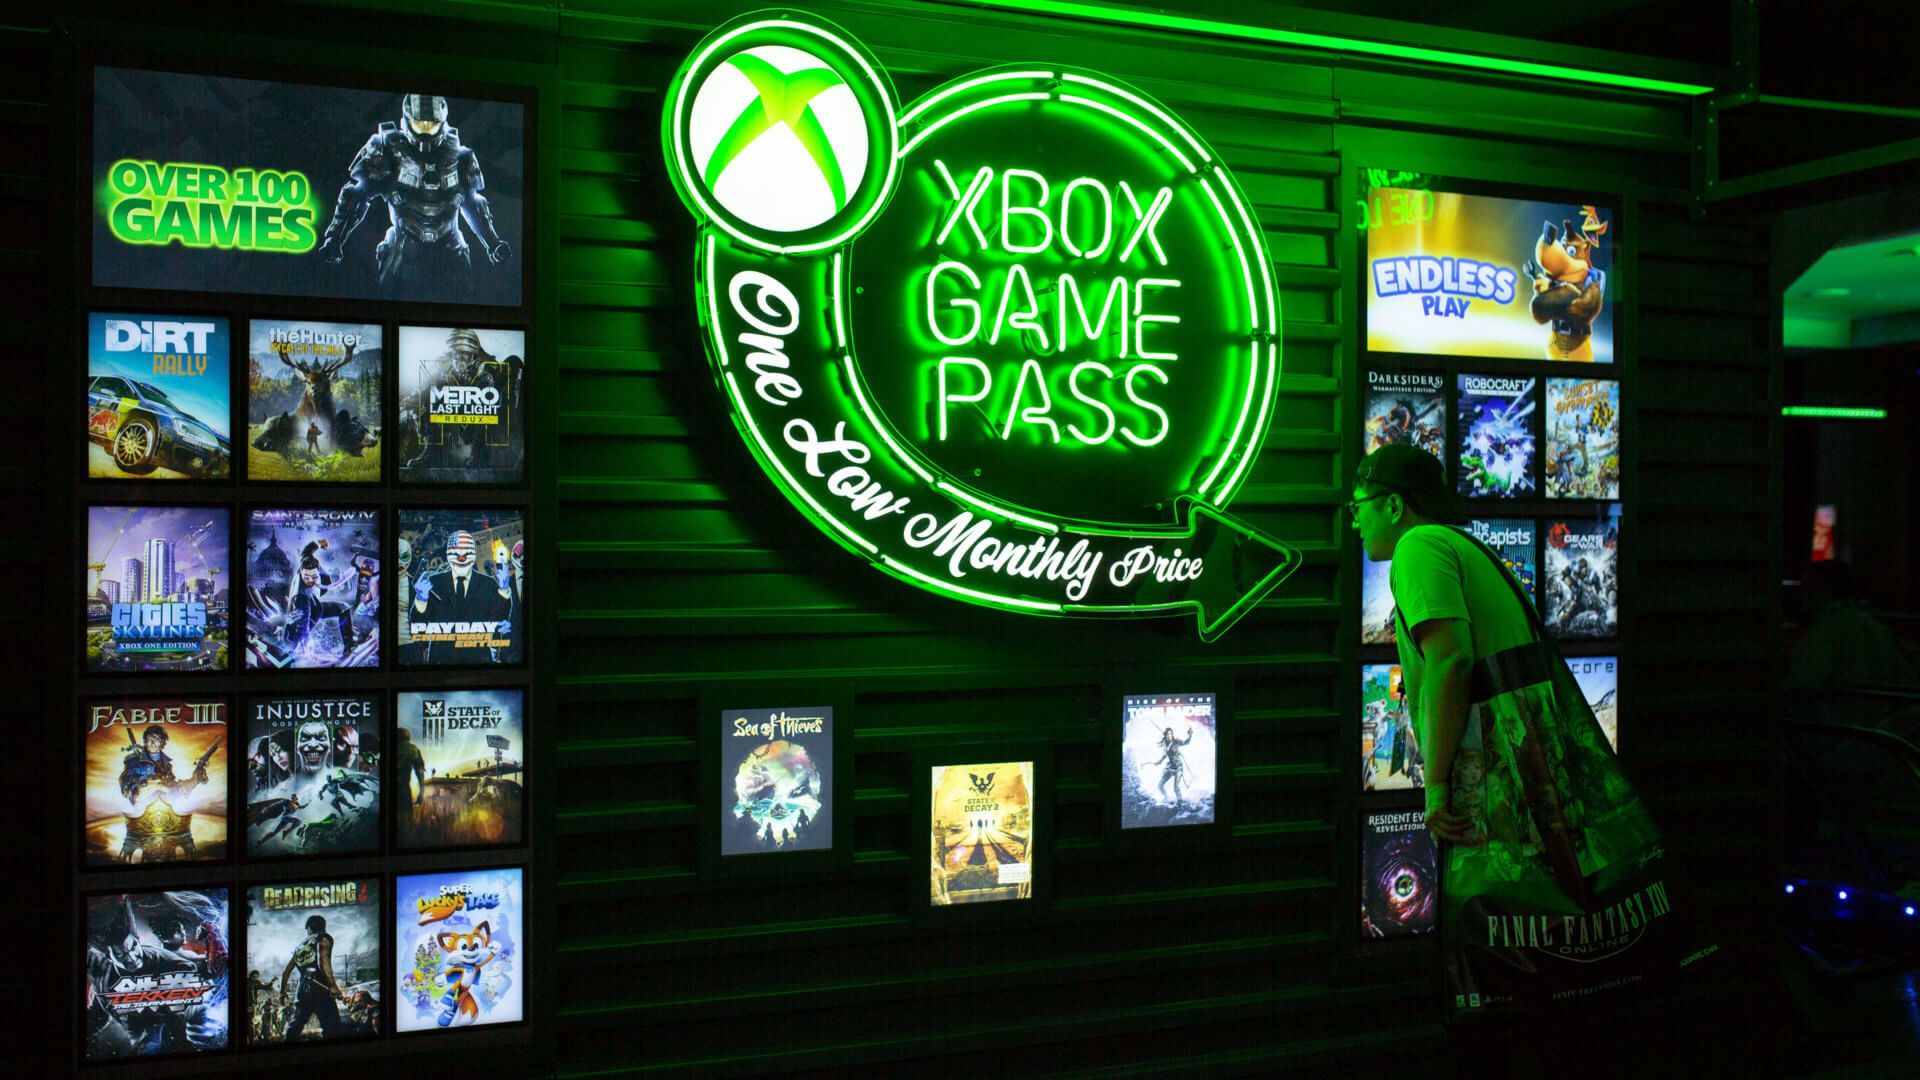 Xbox Game Pass strong announcements coming shortly